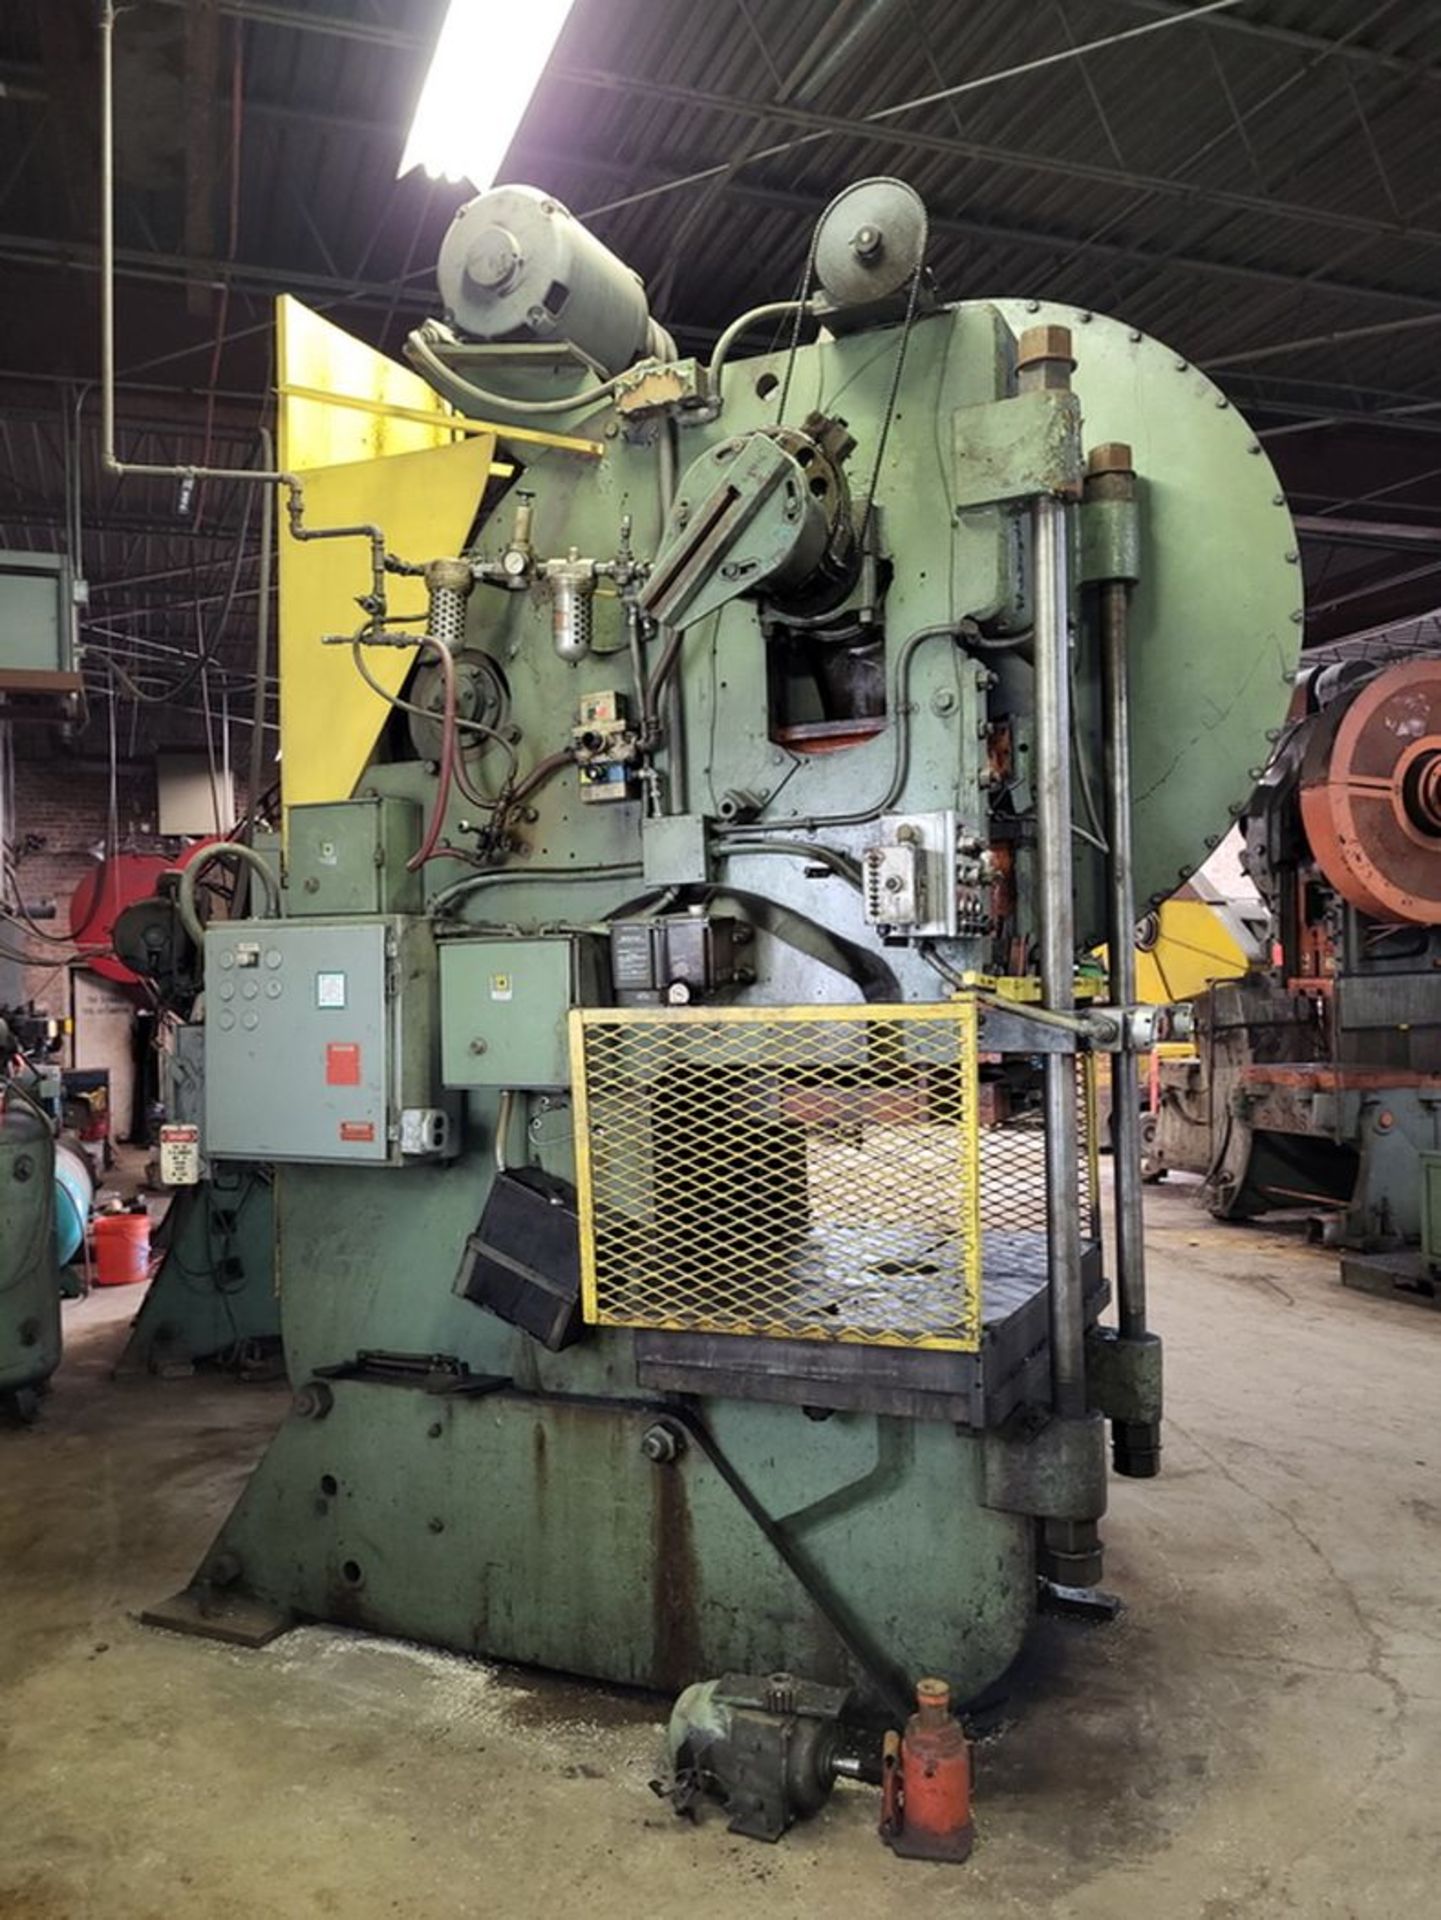 Warco 150-Ton Cap. Model 150 O.B.I. Punch Press, SN: 84119, Guarded, Air Clutch, Auto Adjust Motor - Image 2 of 5